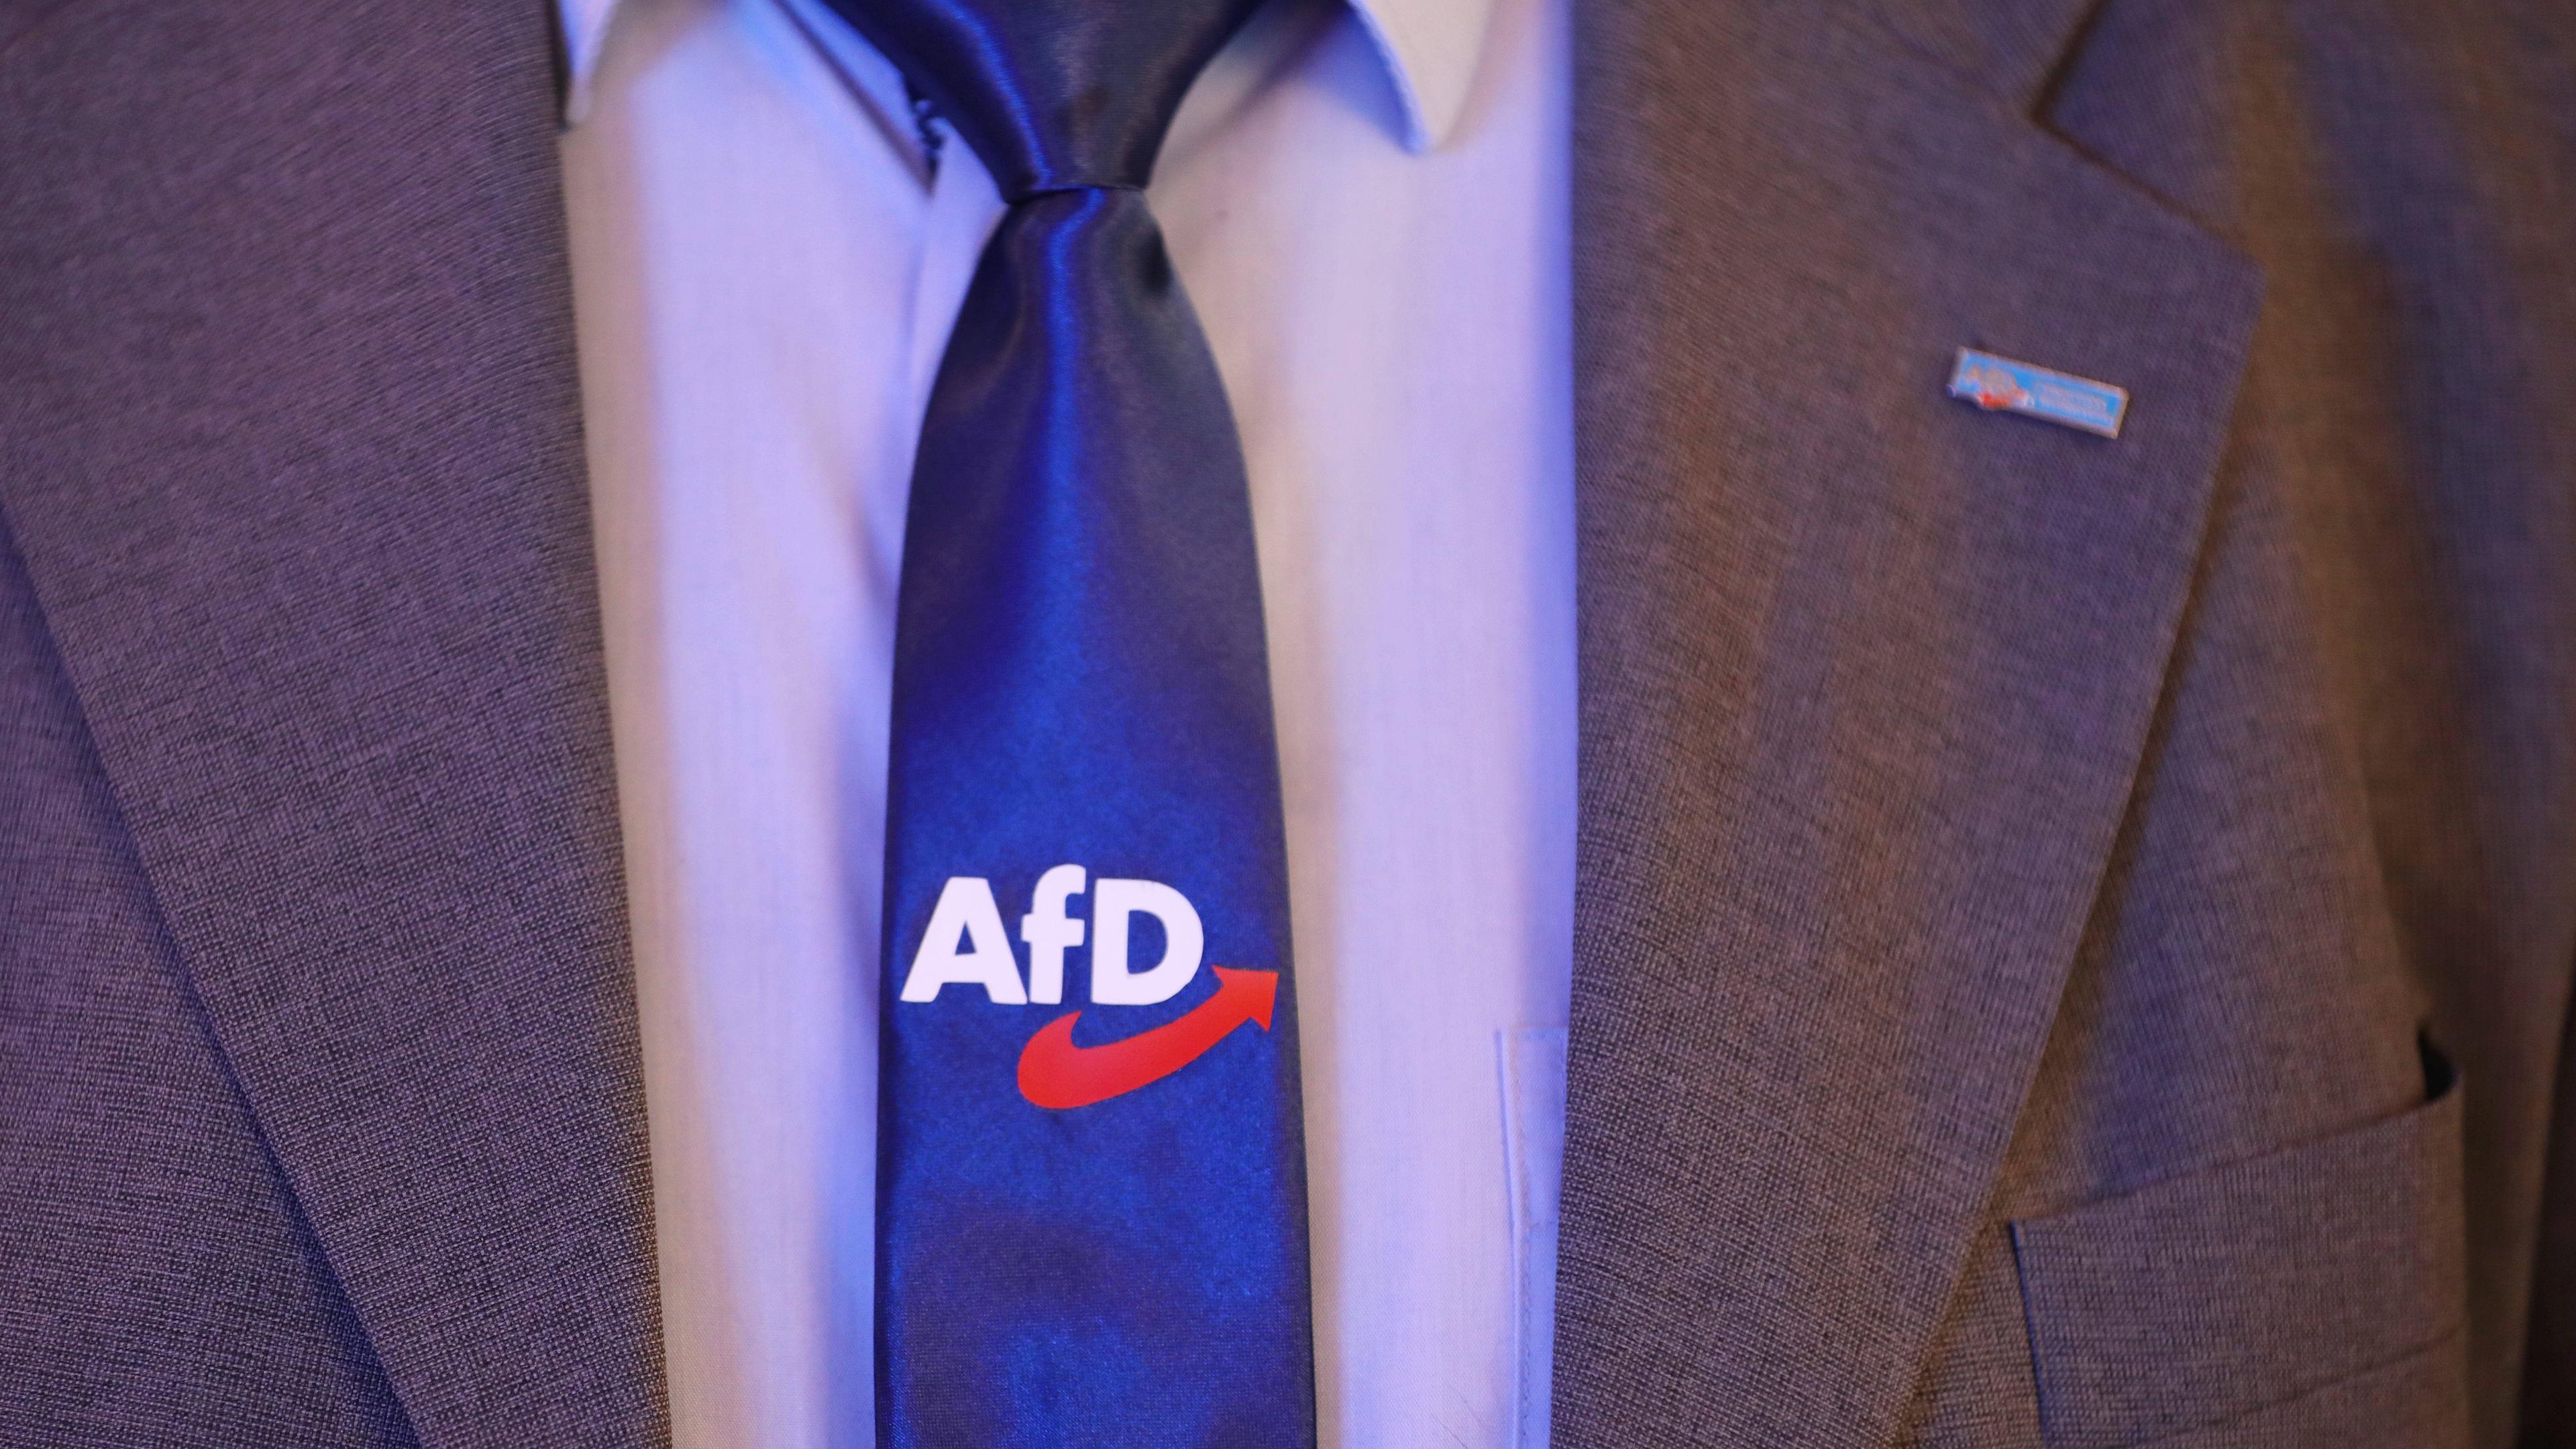 Typical: AfD